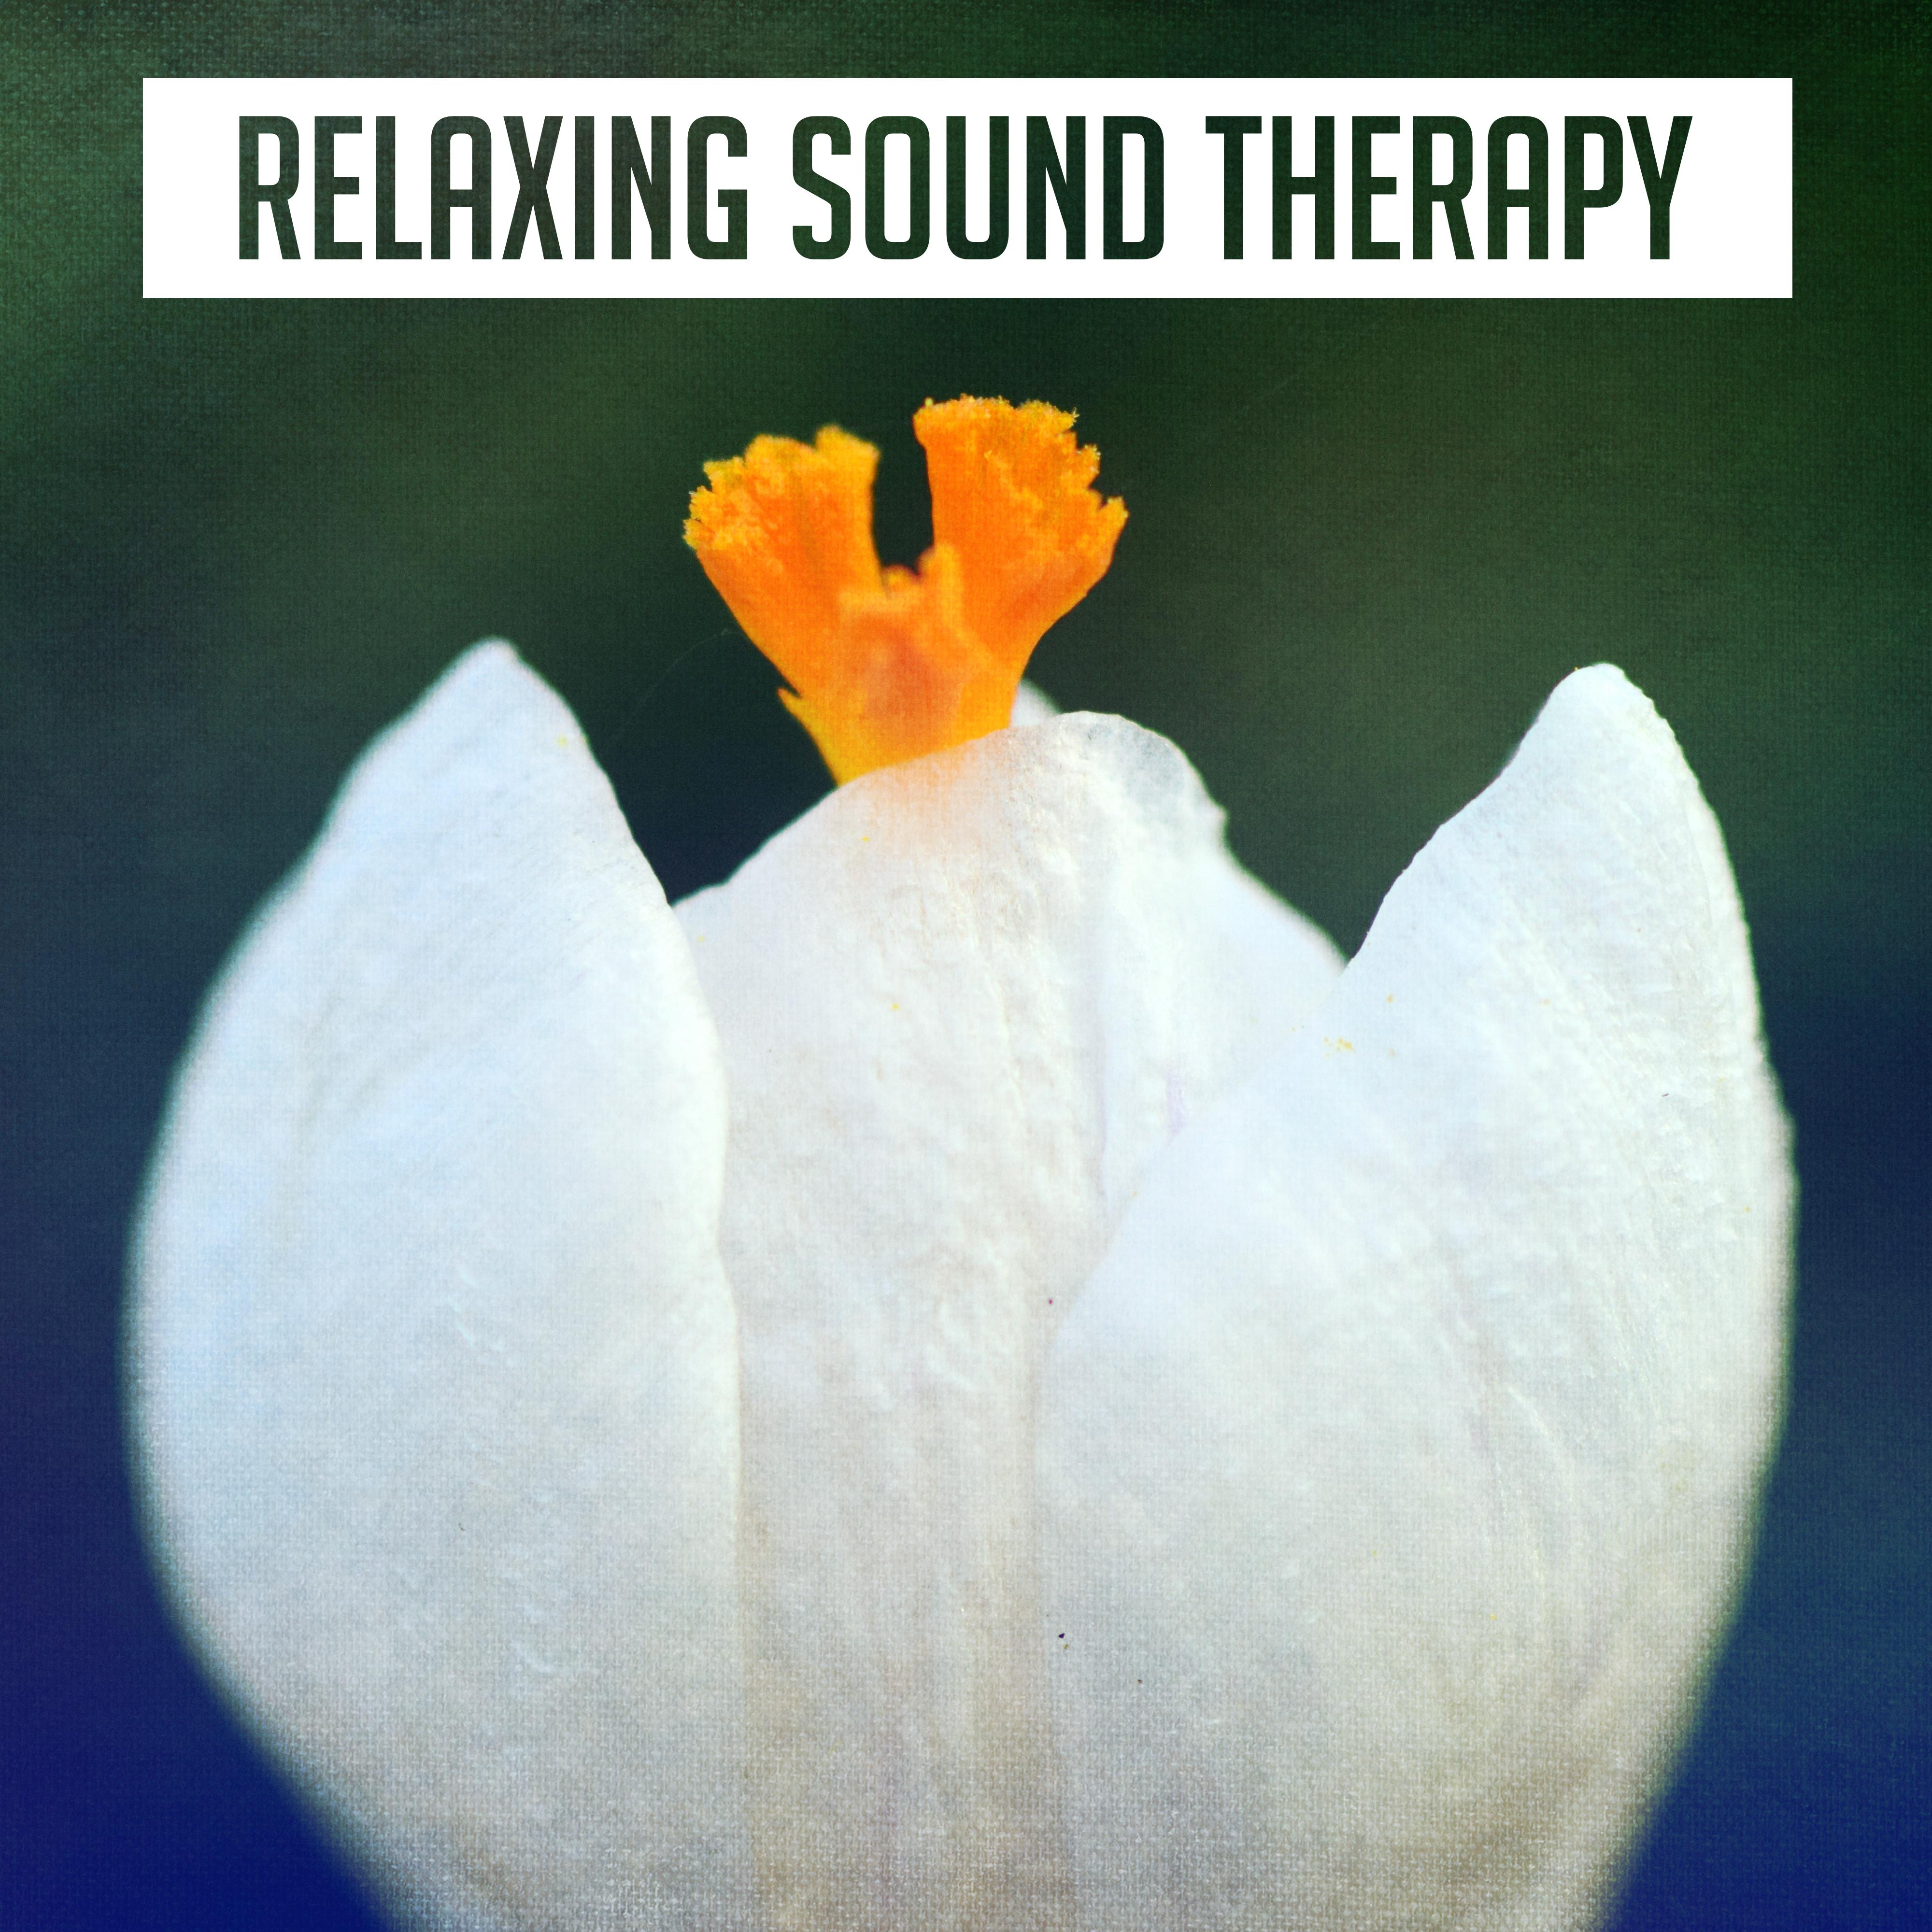 Relaxing Sound Therapy – Peaceful Nature Sounds for Relaxation, Meditation, Soft Rain, Singing Birds, Soothing Piano, Best New Age Music to Rest